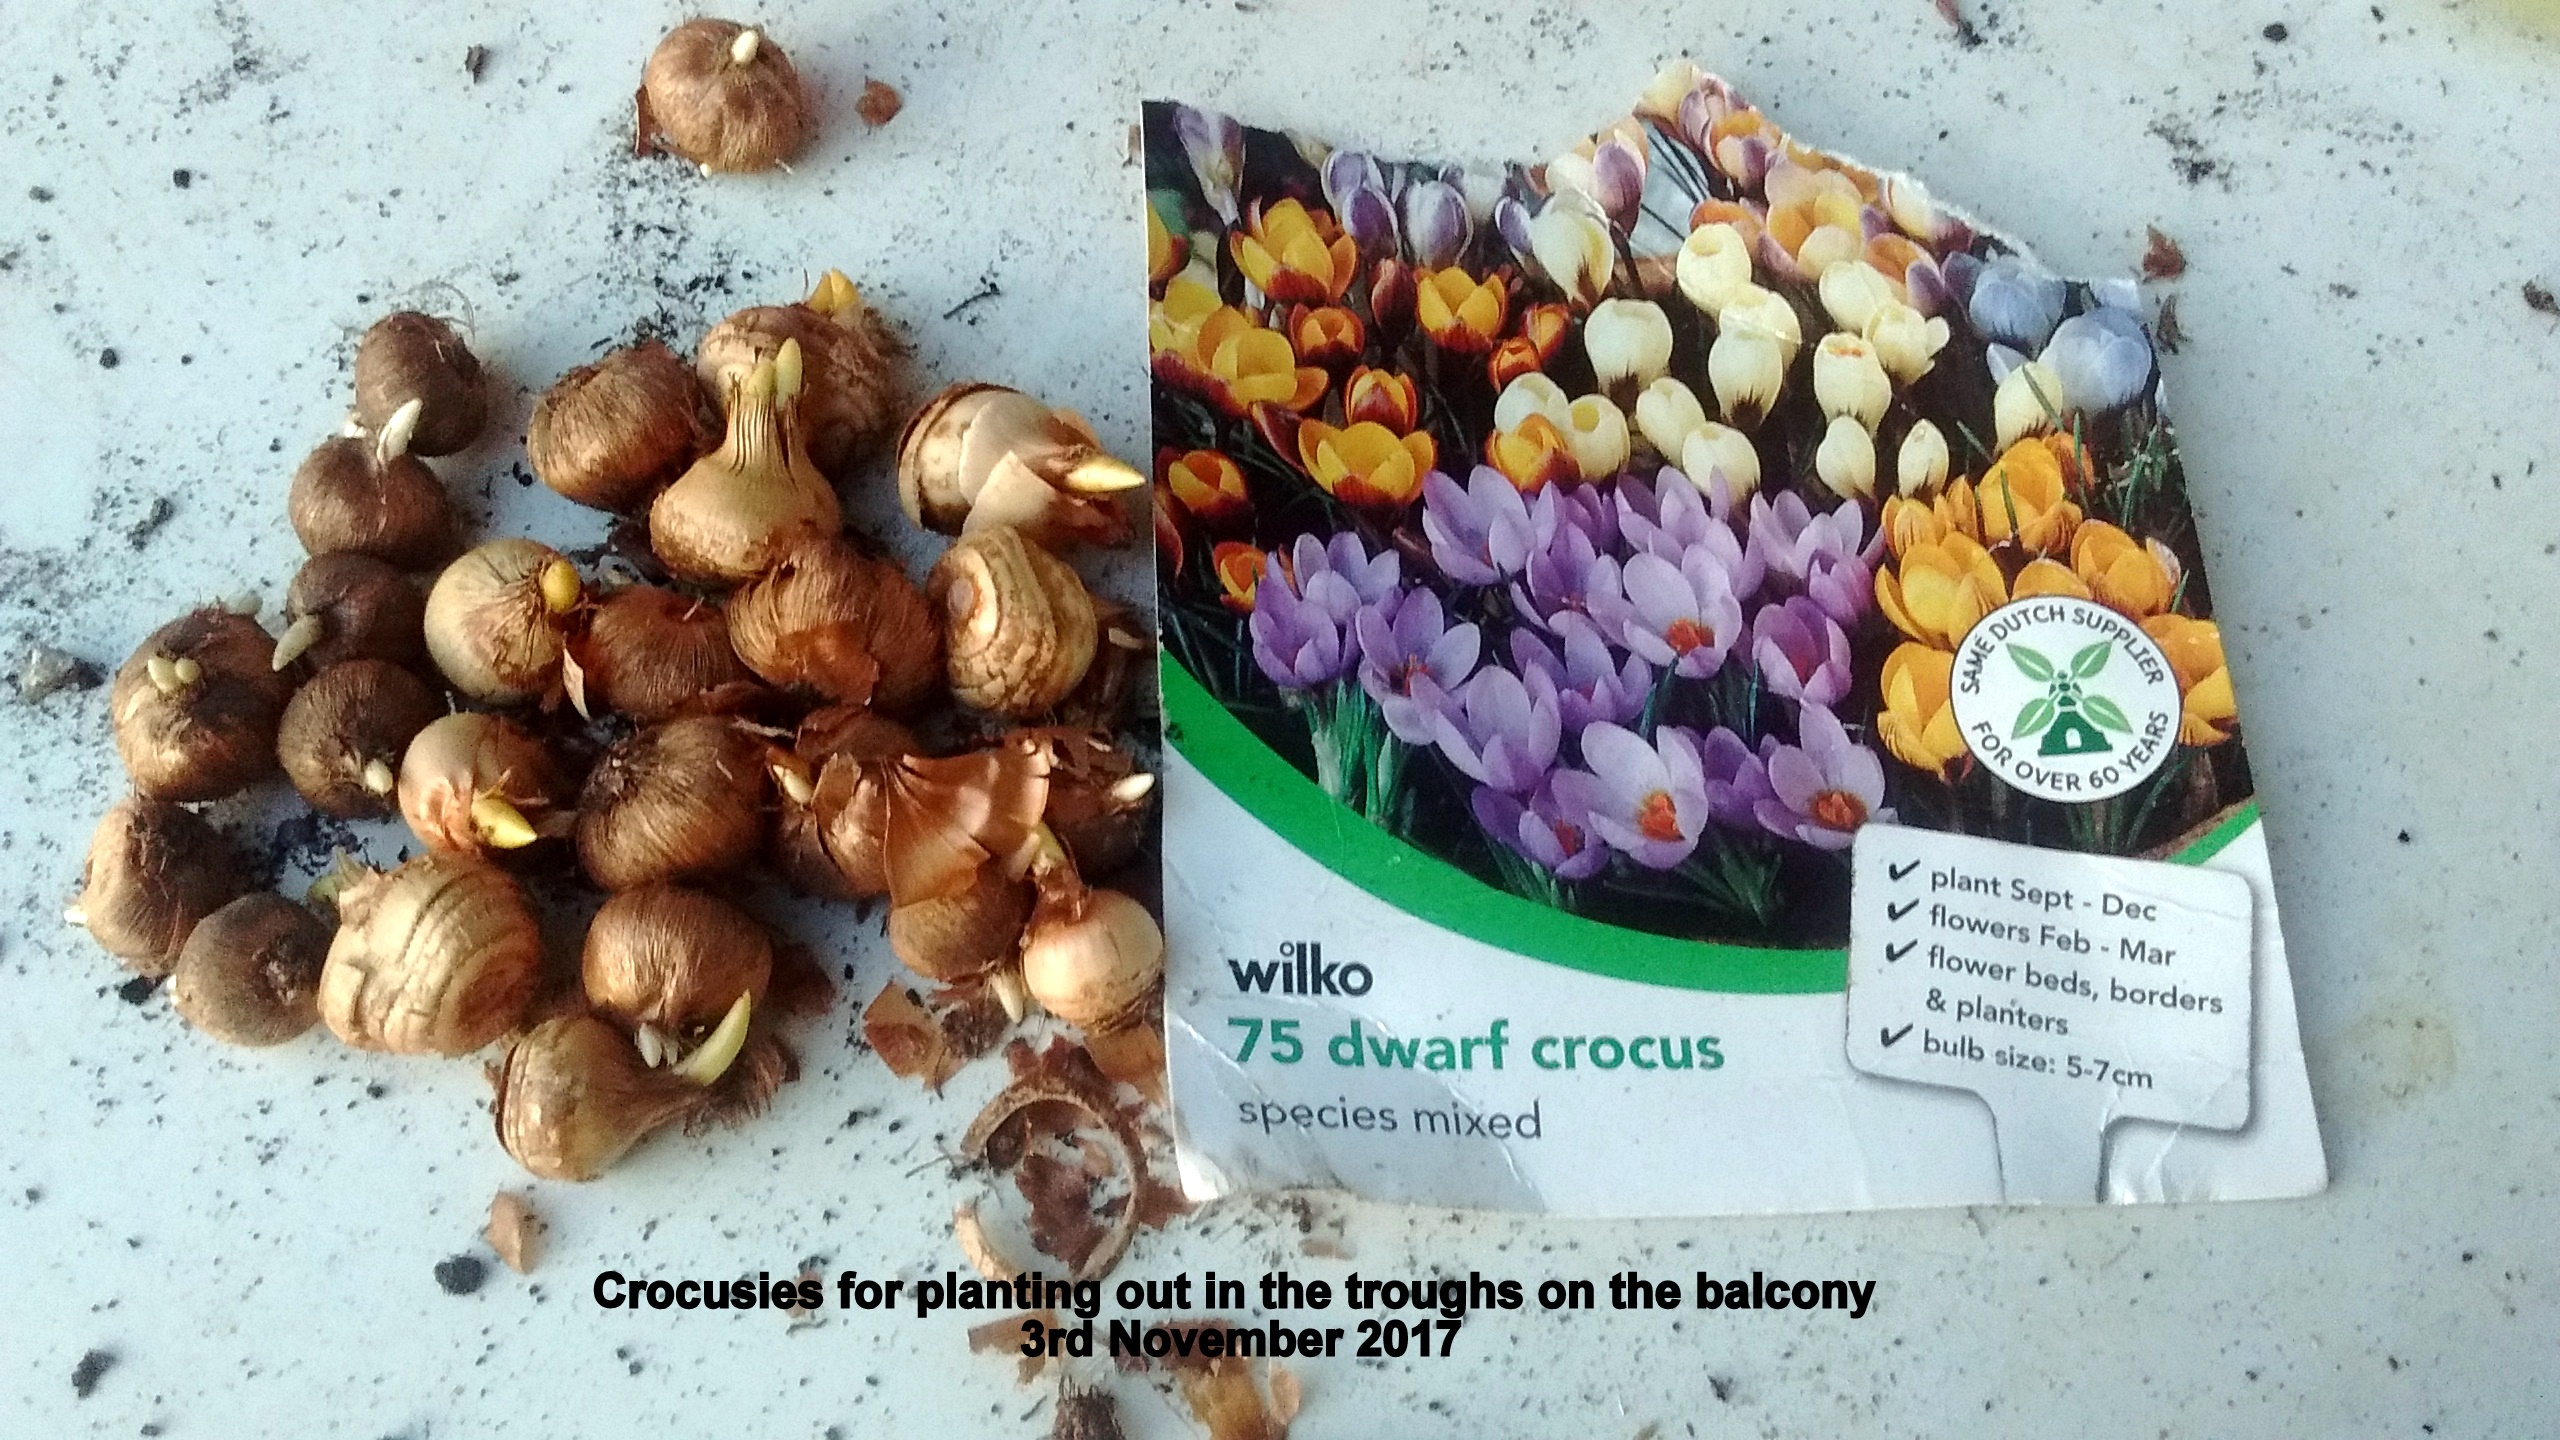 Crocuses for planting out in the troughs on the balcony 3rd November 2017